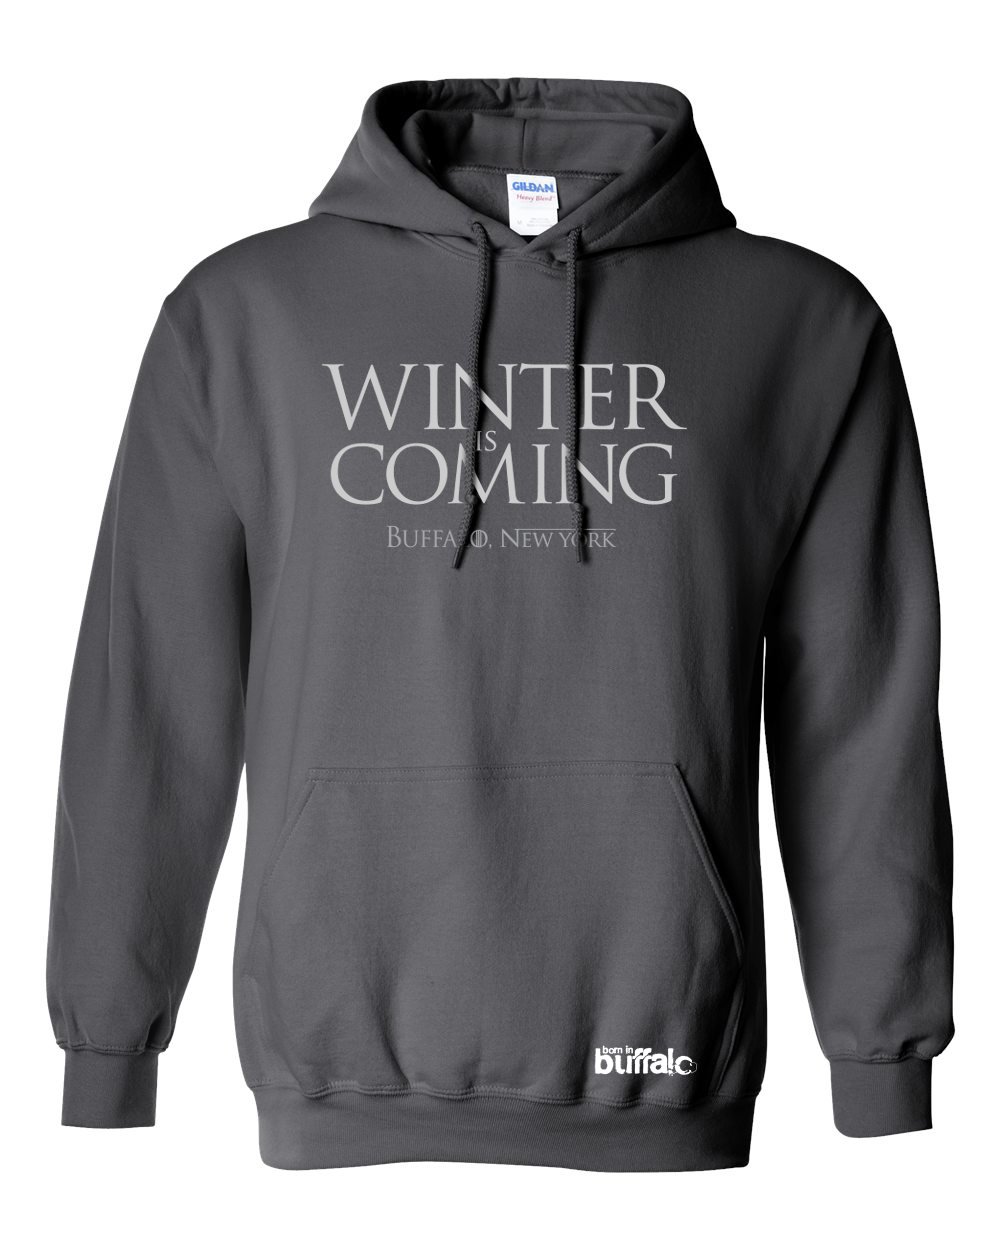 winter is coming image